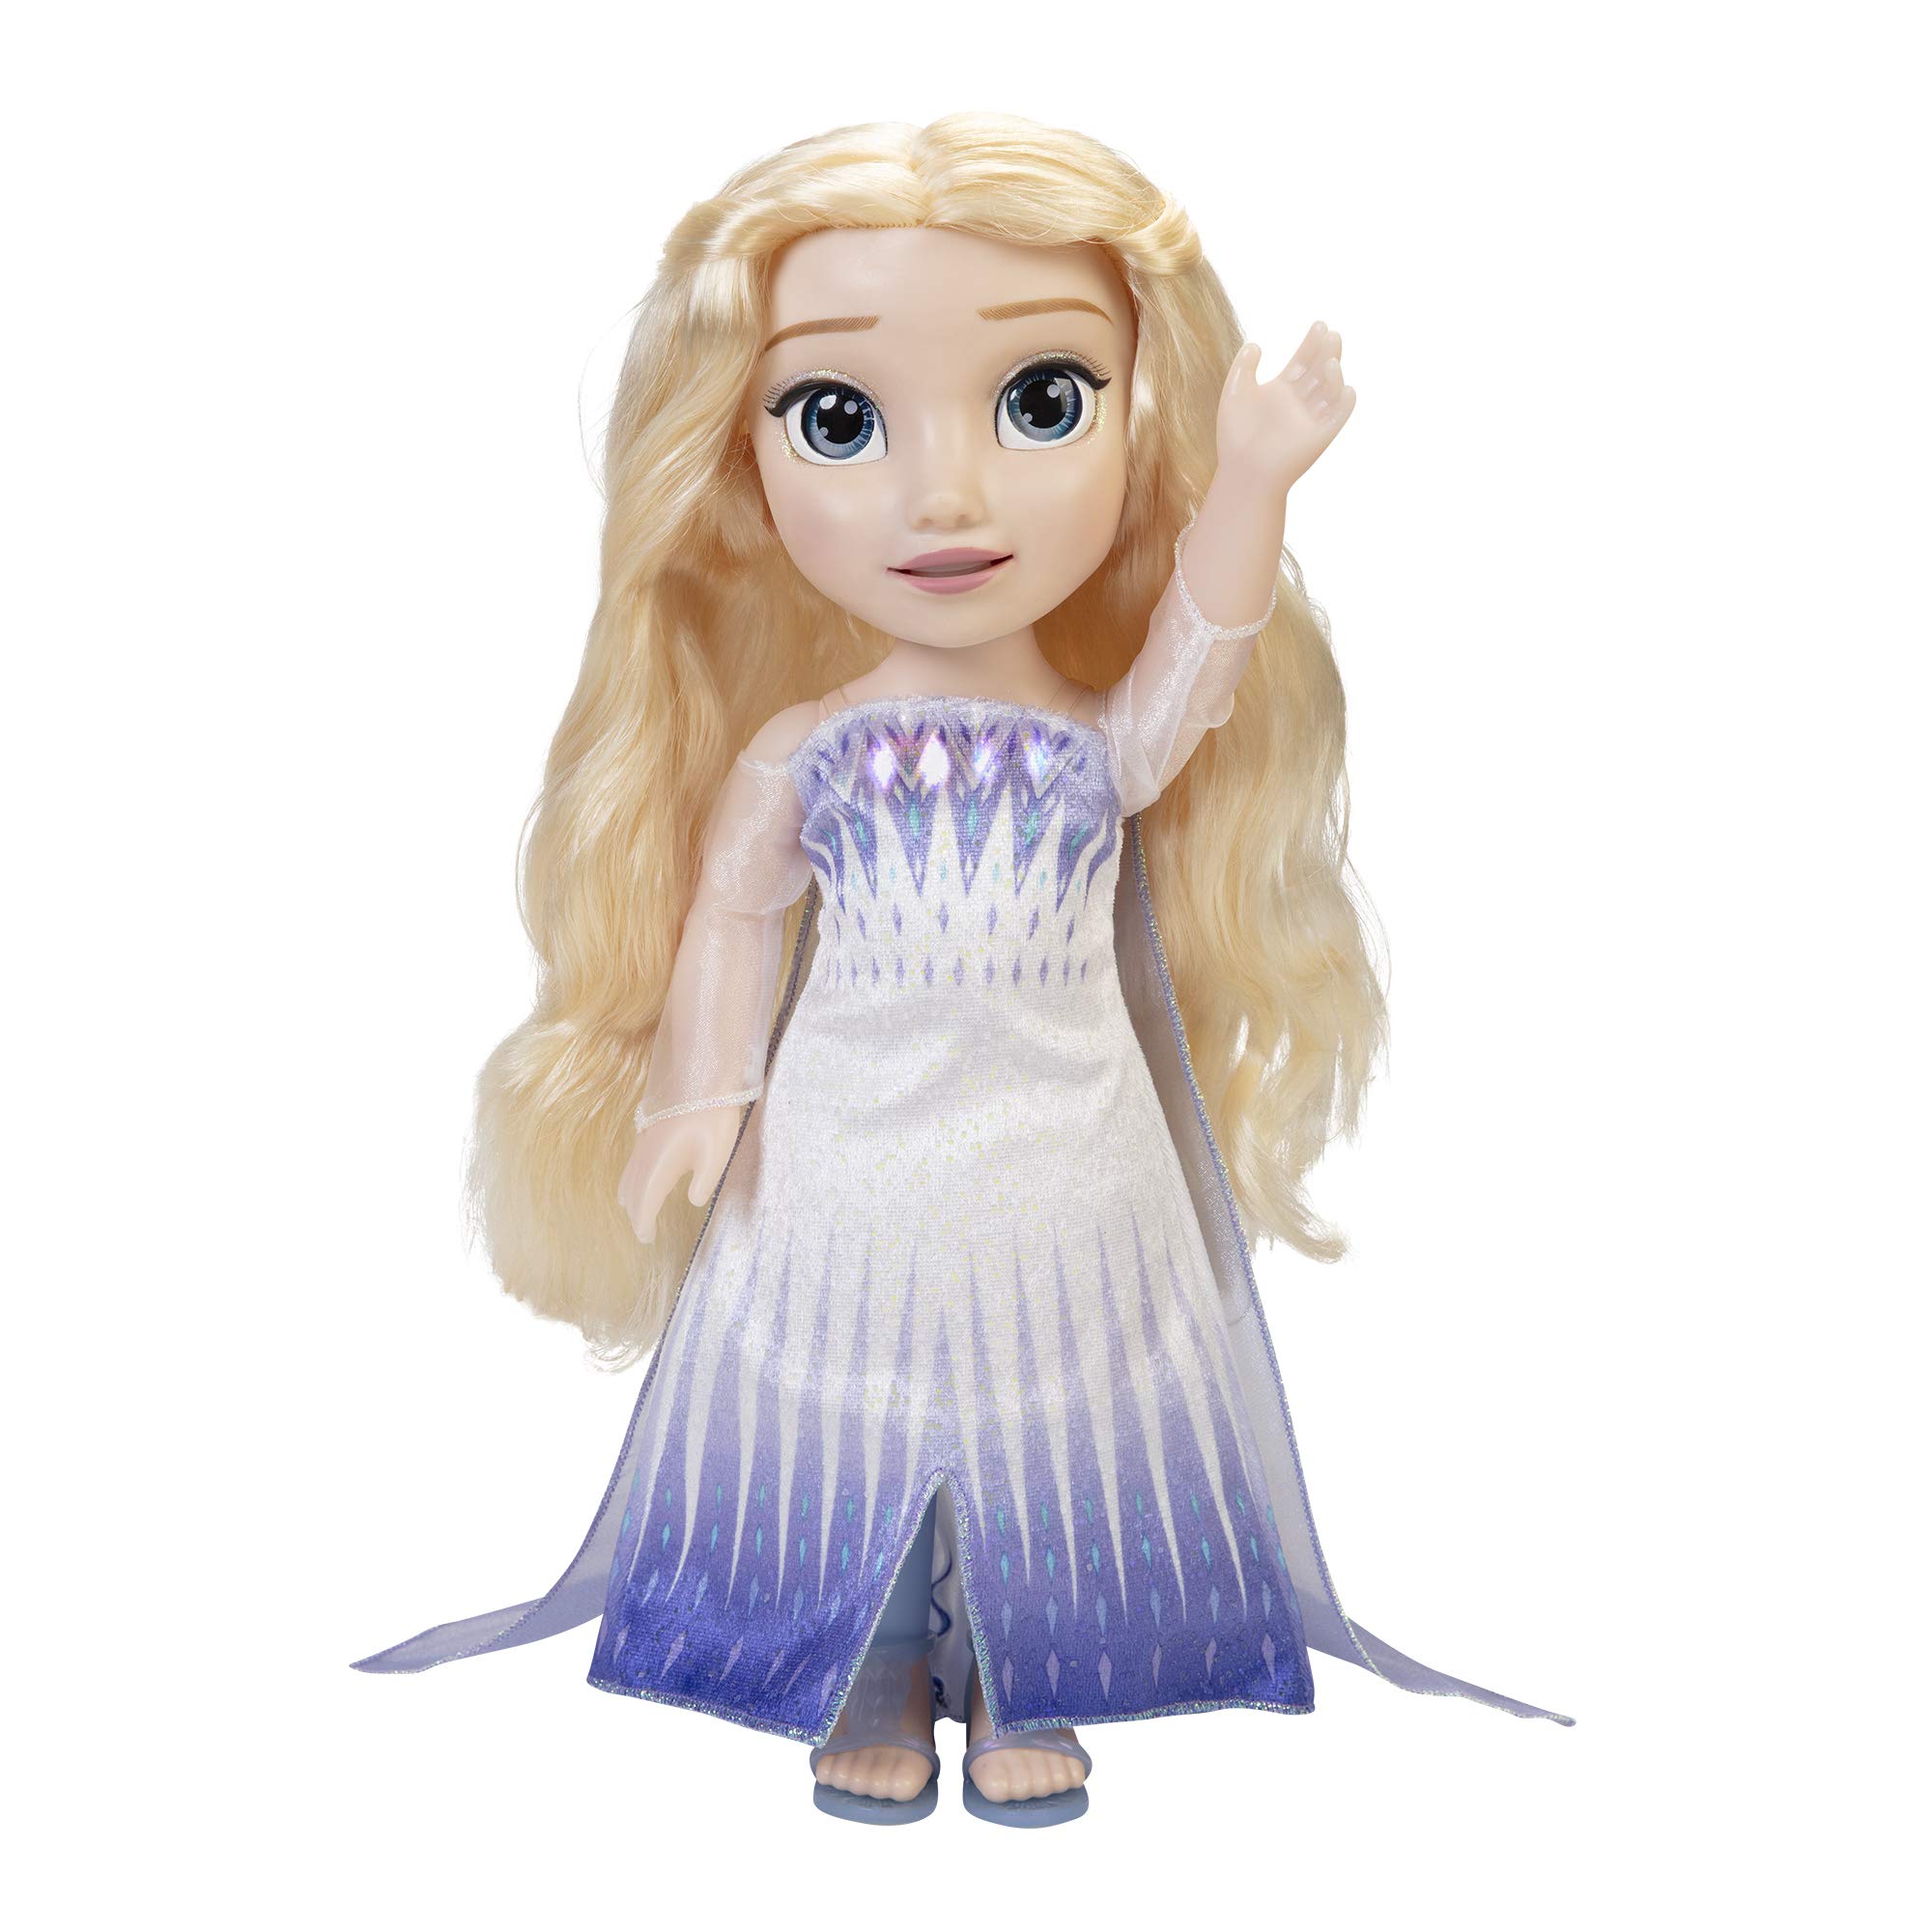 Disney Frozen 2 Magic in Motion ELSA Puppe, Feature ELSA Dolls Lips Moves As She Sings 'Show Yourself' Includes Elsas Light Up Dress and Long Hair for Added Play